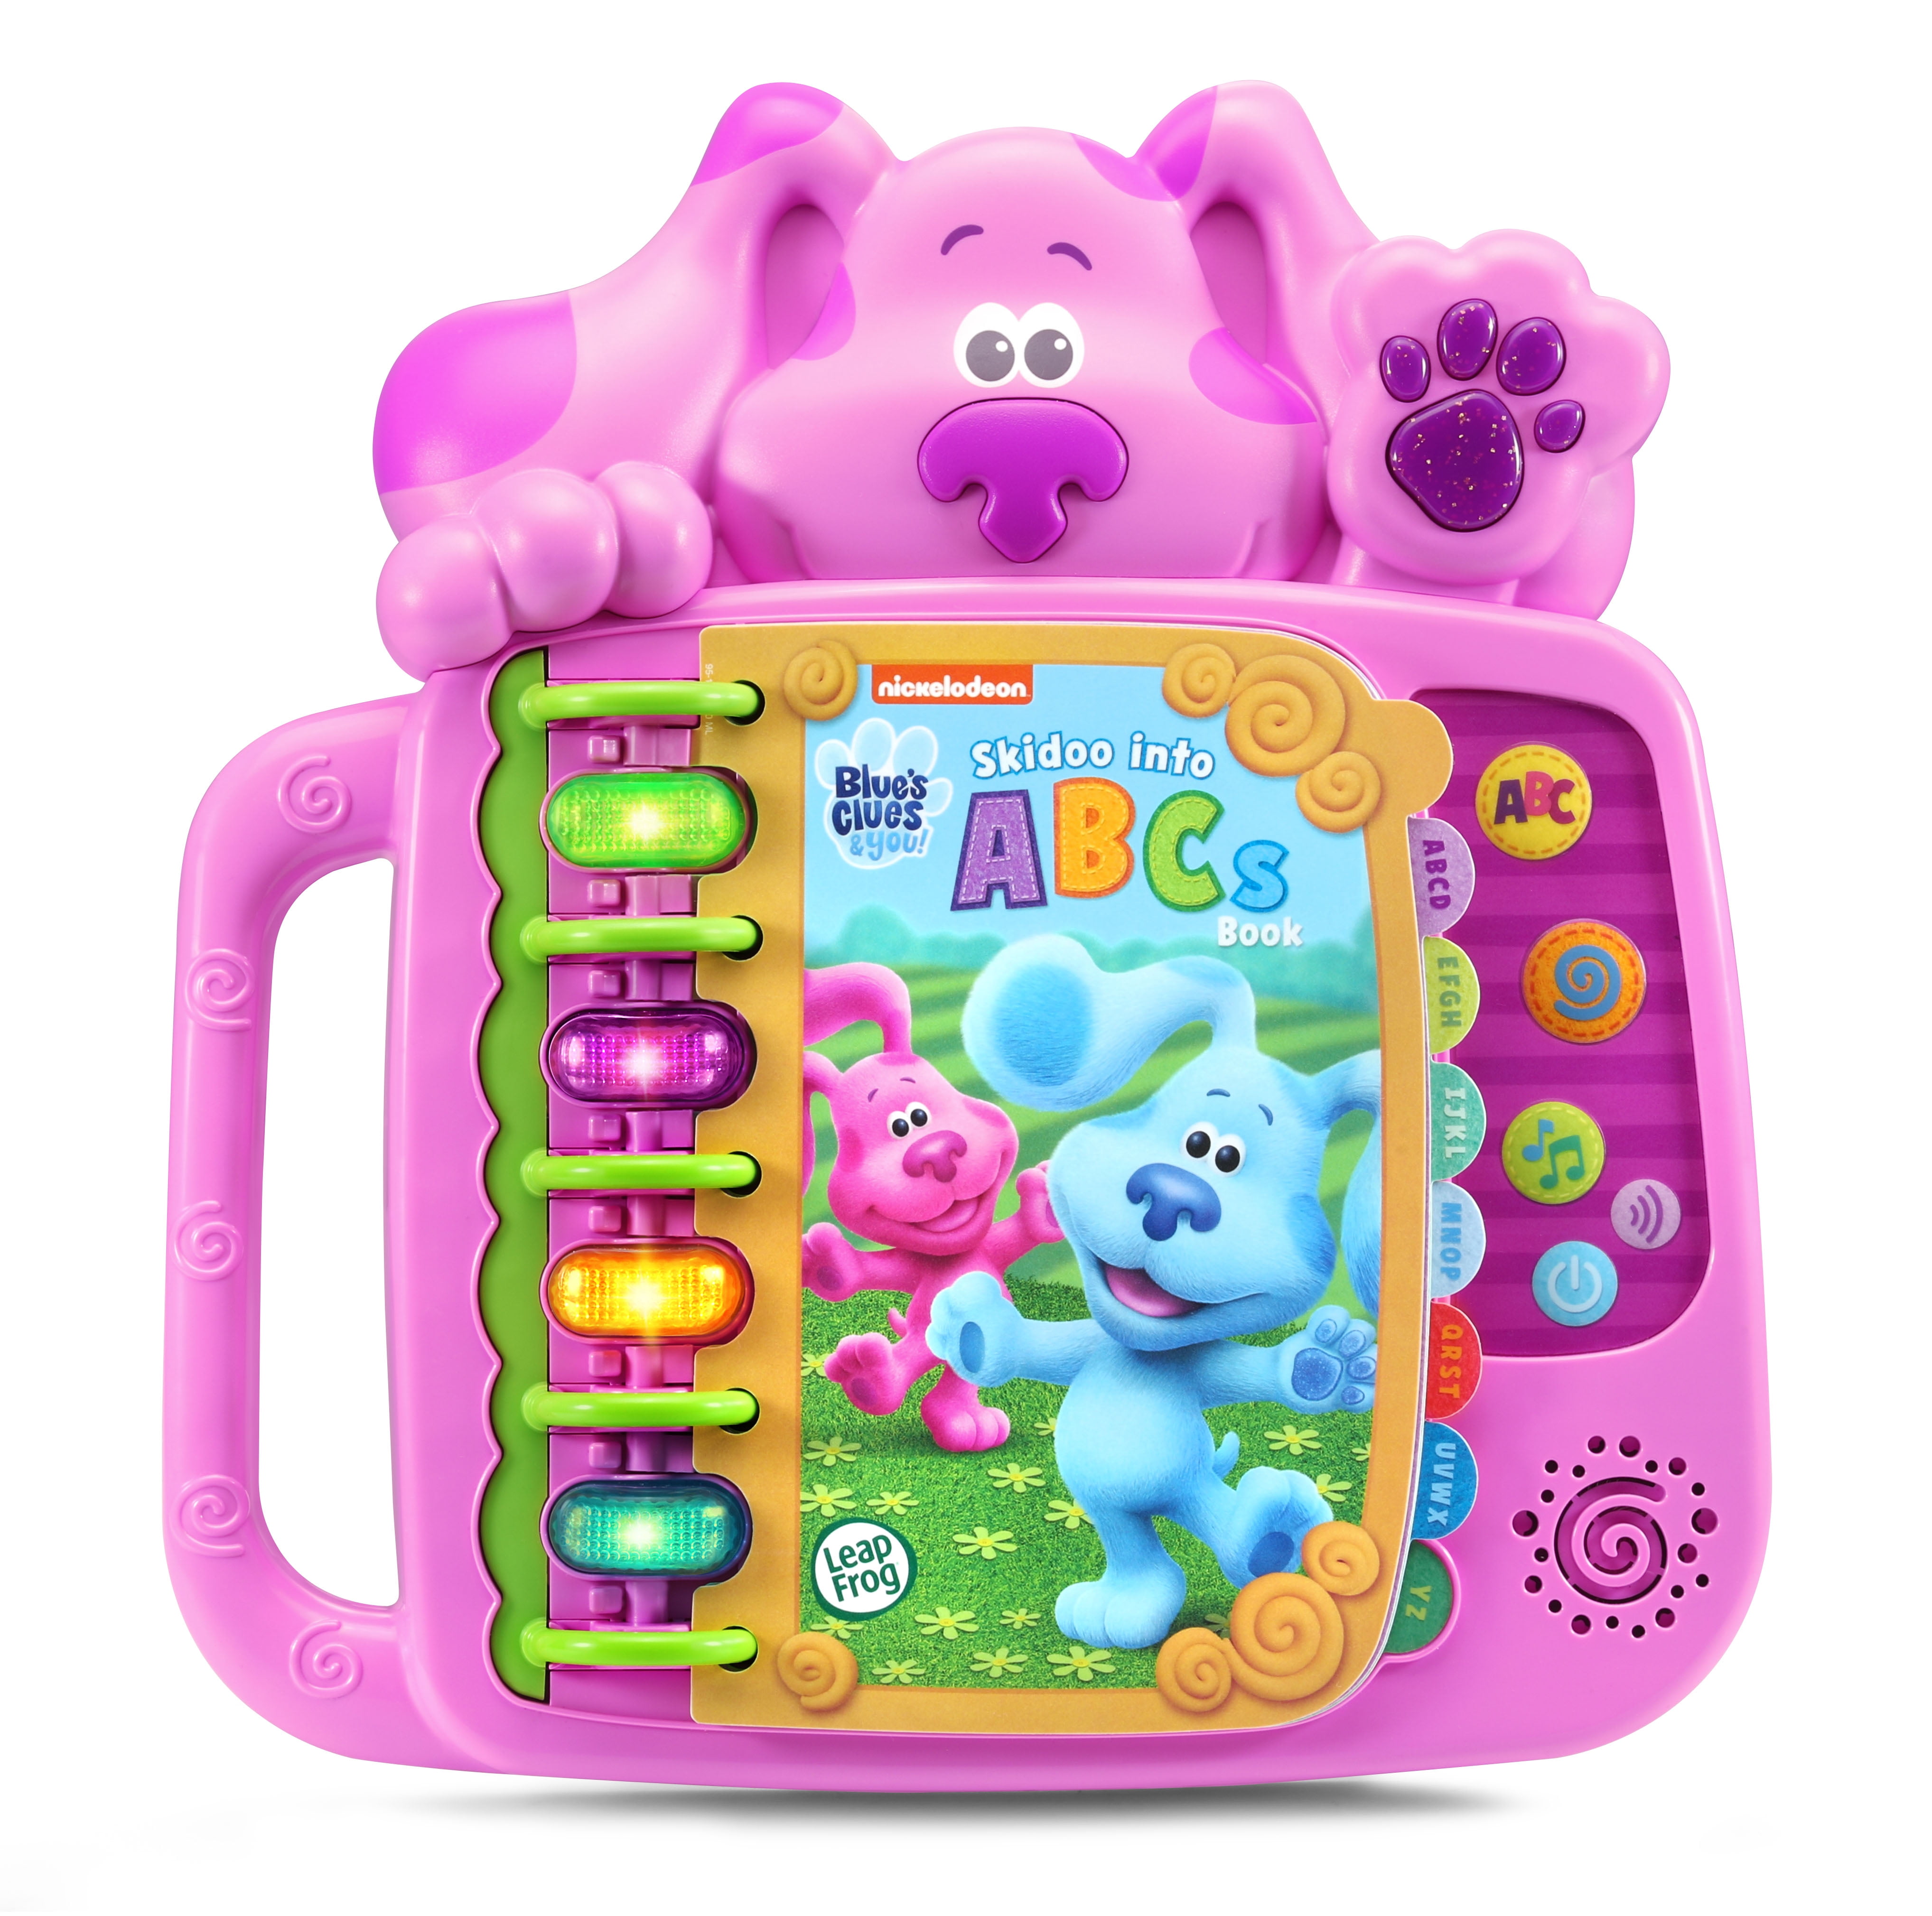 LeapFrog Blues Clues and You Skidoo Into ABCs Book Magenta 